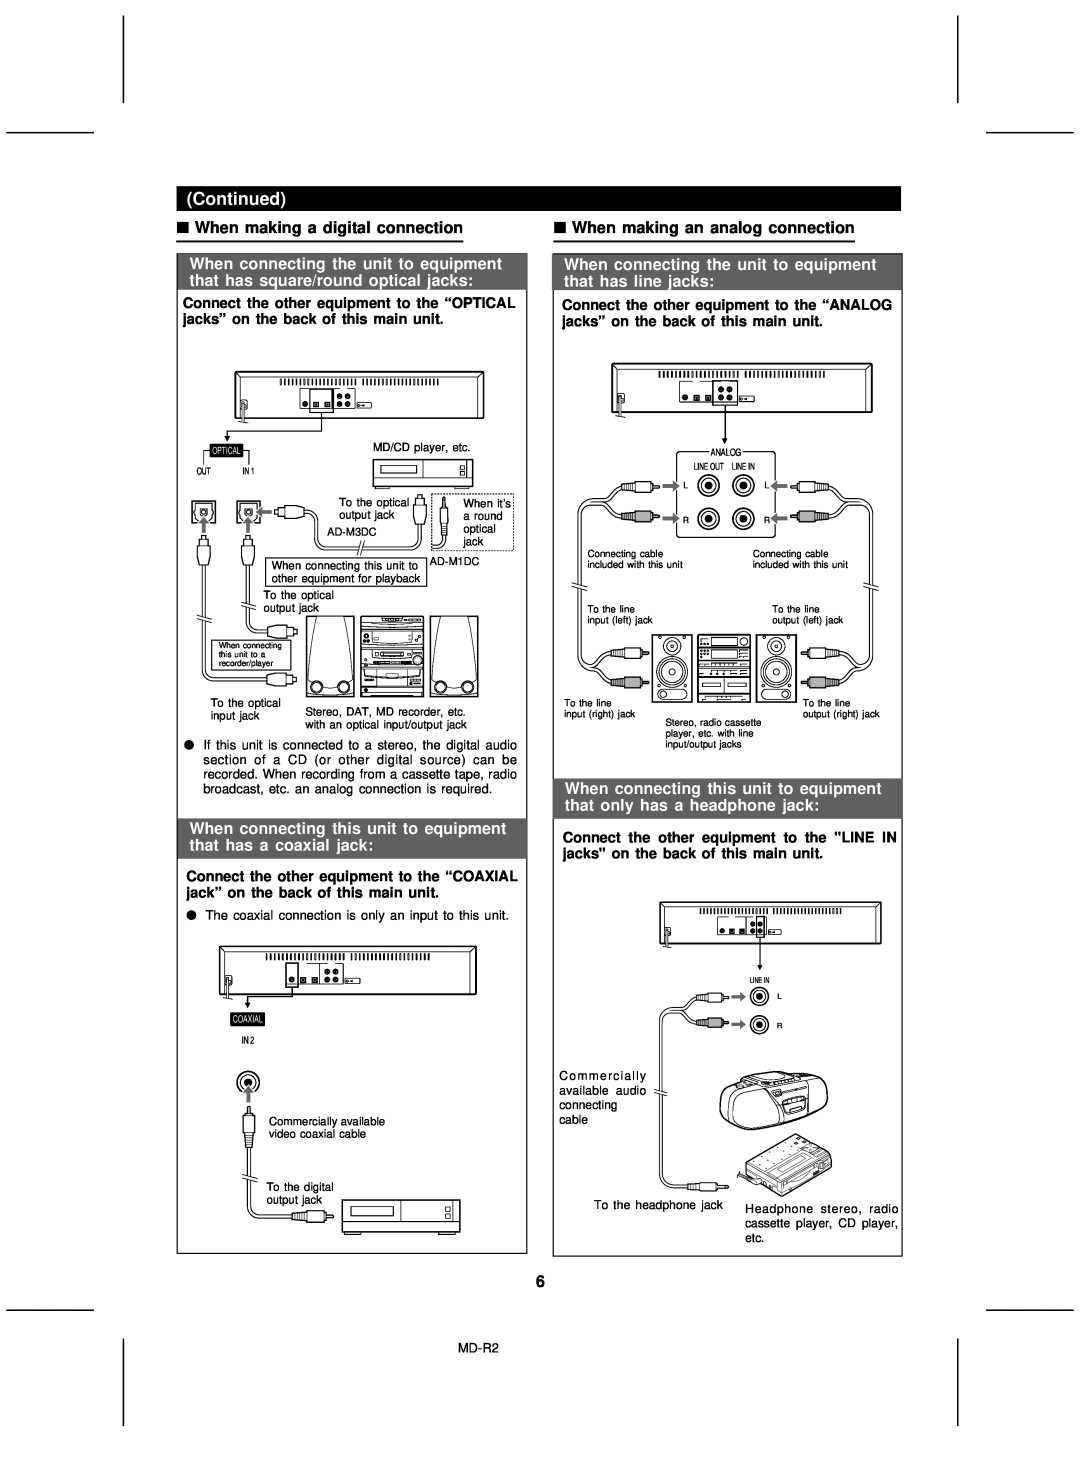 Kenwood MD-R2 operation manual Continued, When making a digital connection, When making an analog connection 